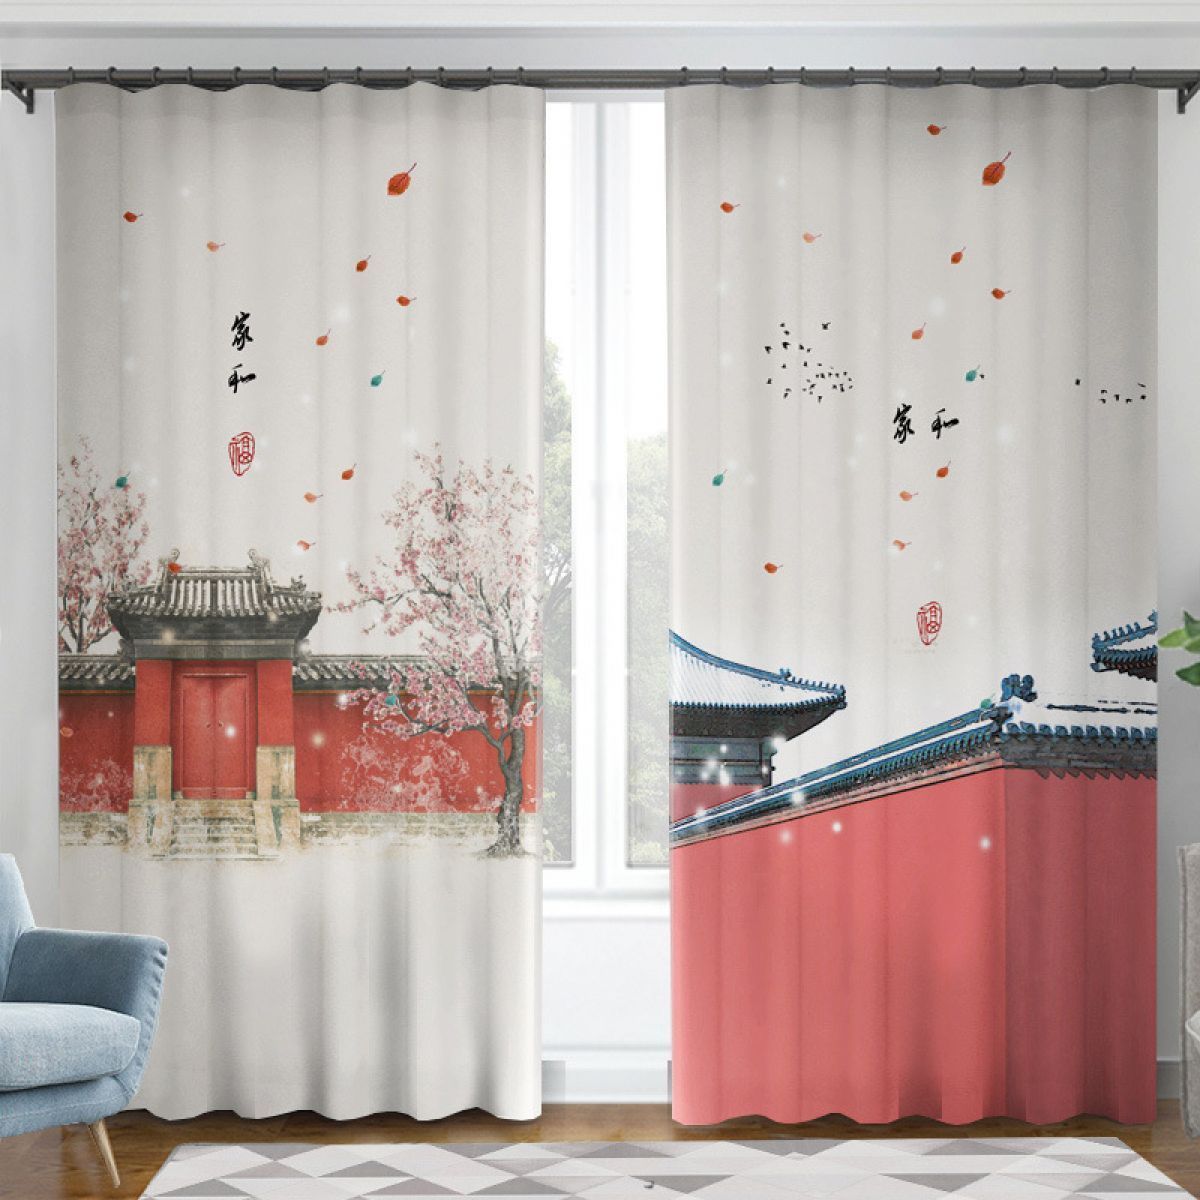 Traditional Chinese Buildings And Falling Leaves Printed Window Curtain Home Decor